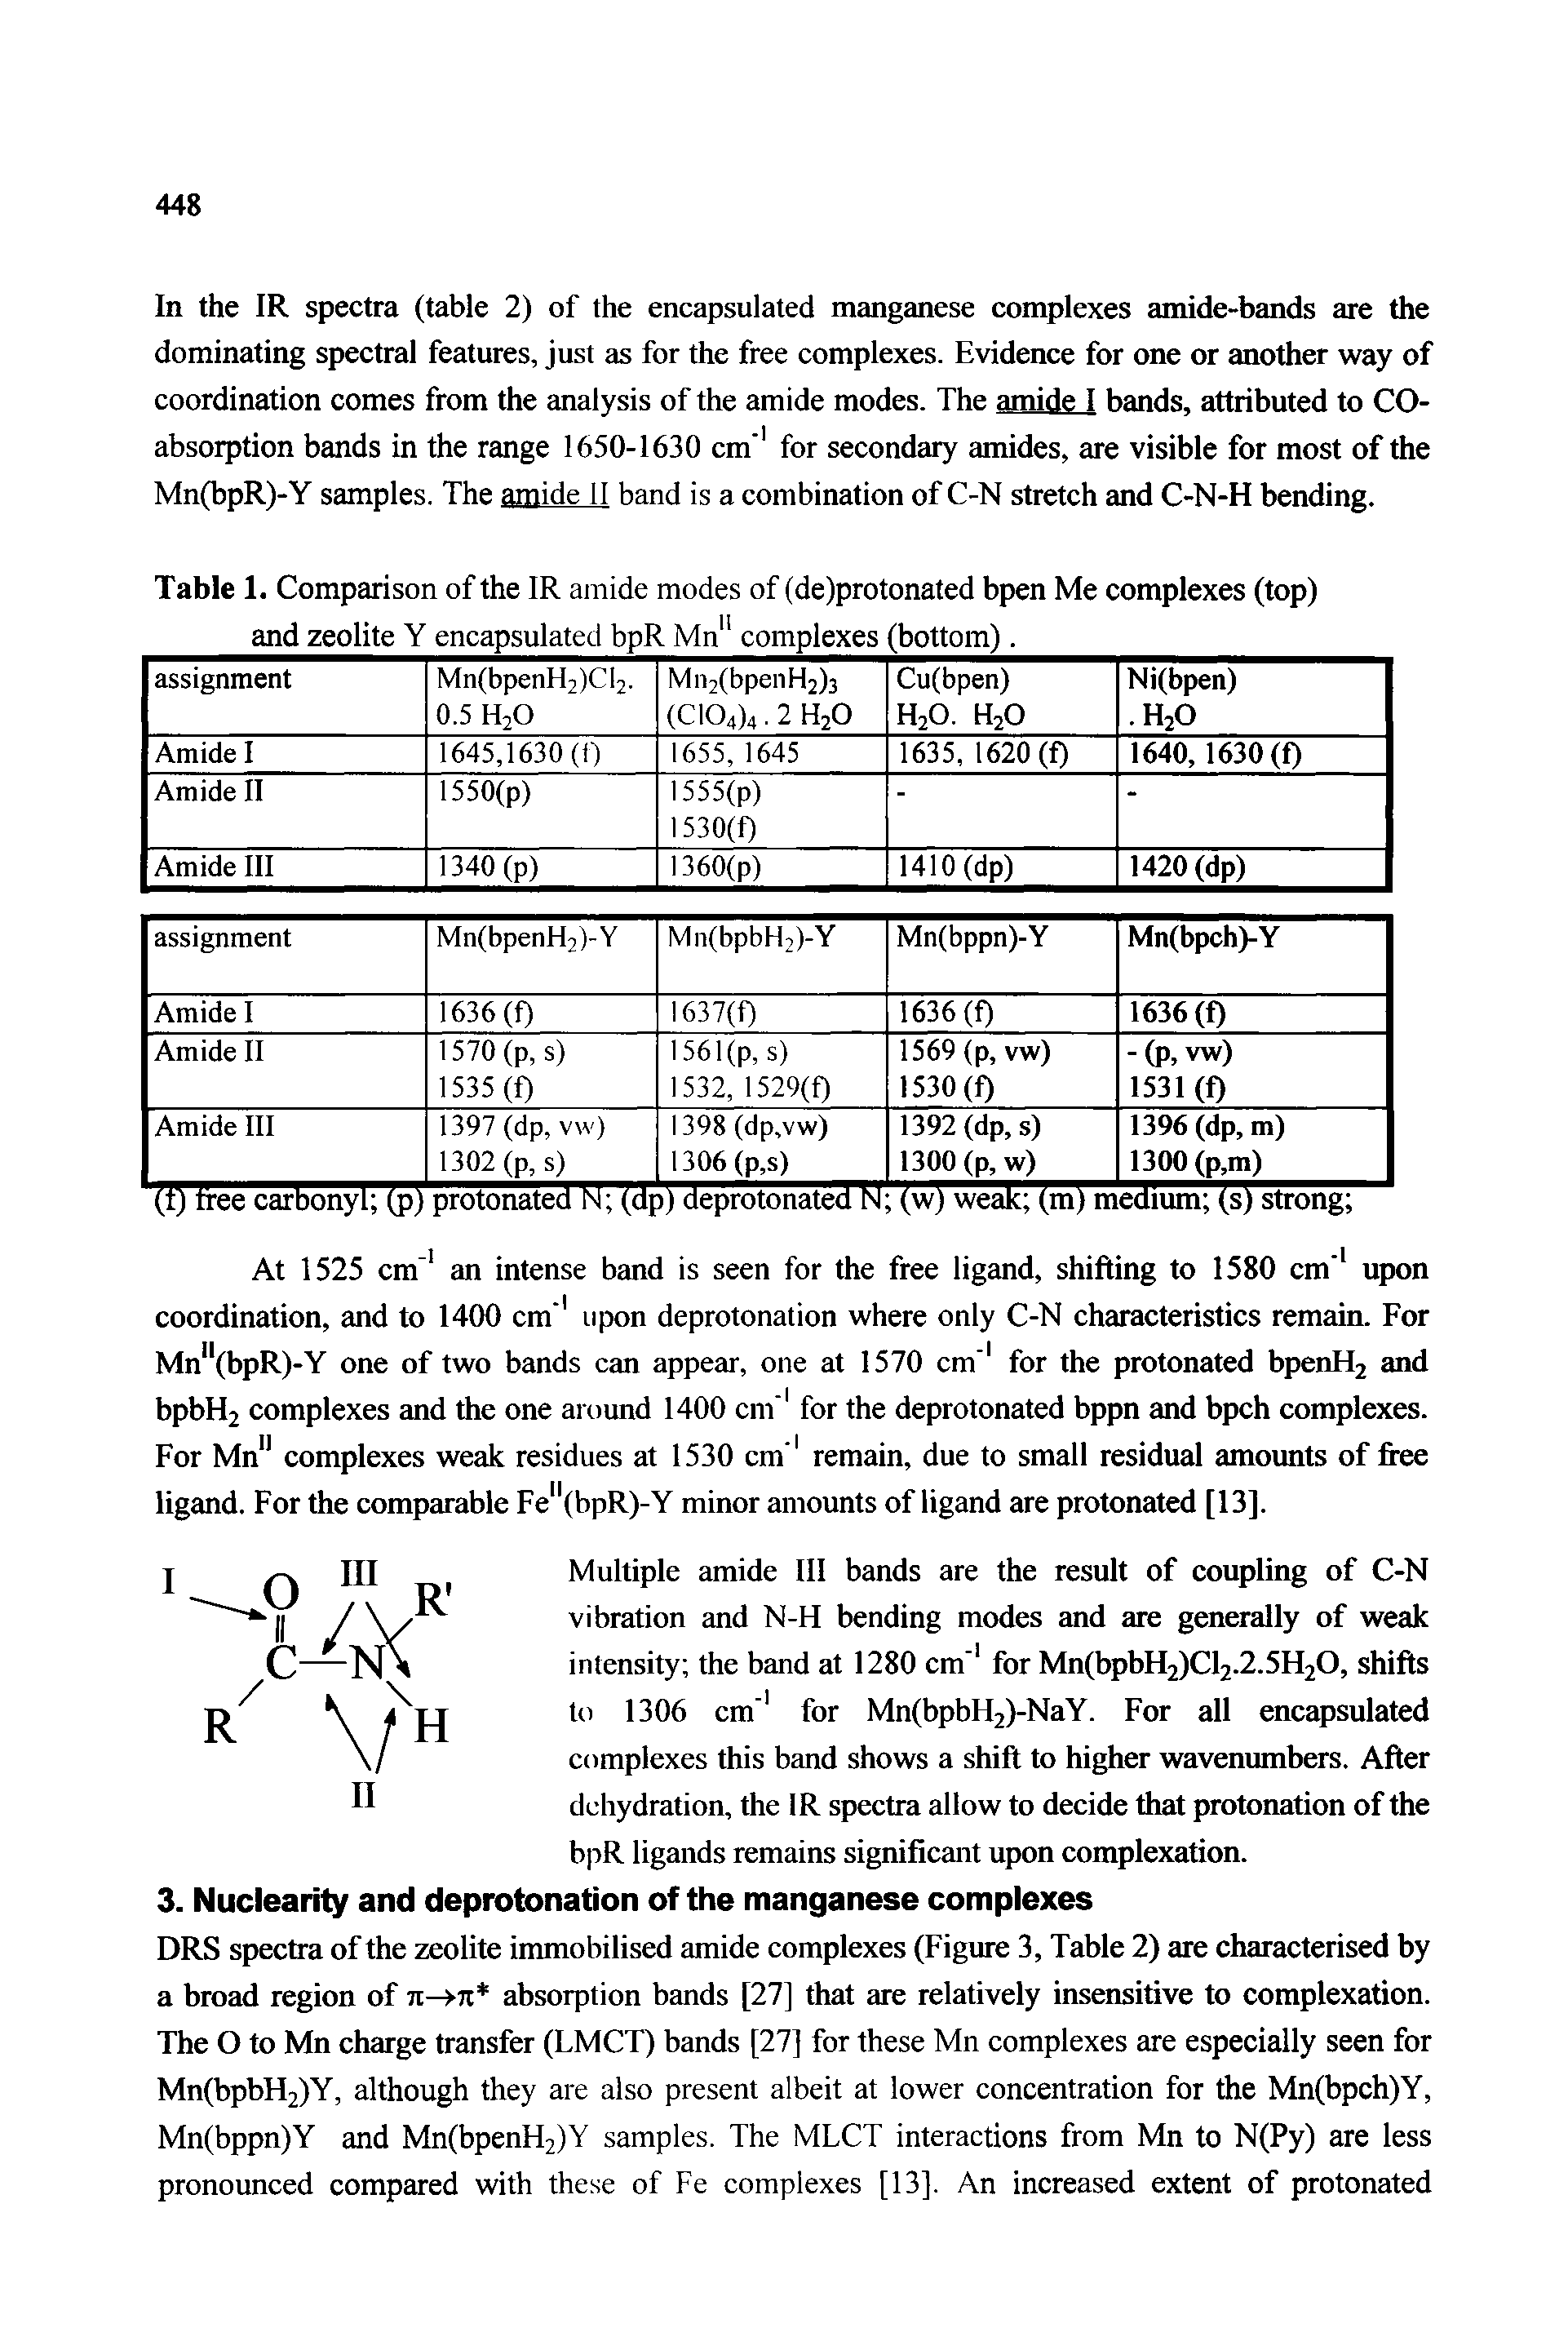 Table 1. Comparison of the IR amide modes of (de)protonated bpen Me complexes (top) and zeolite Y encapsulated bpR Mn" complexes (bottom).